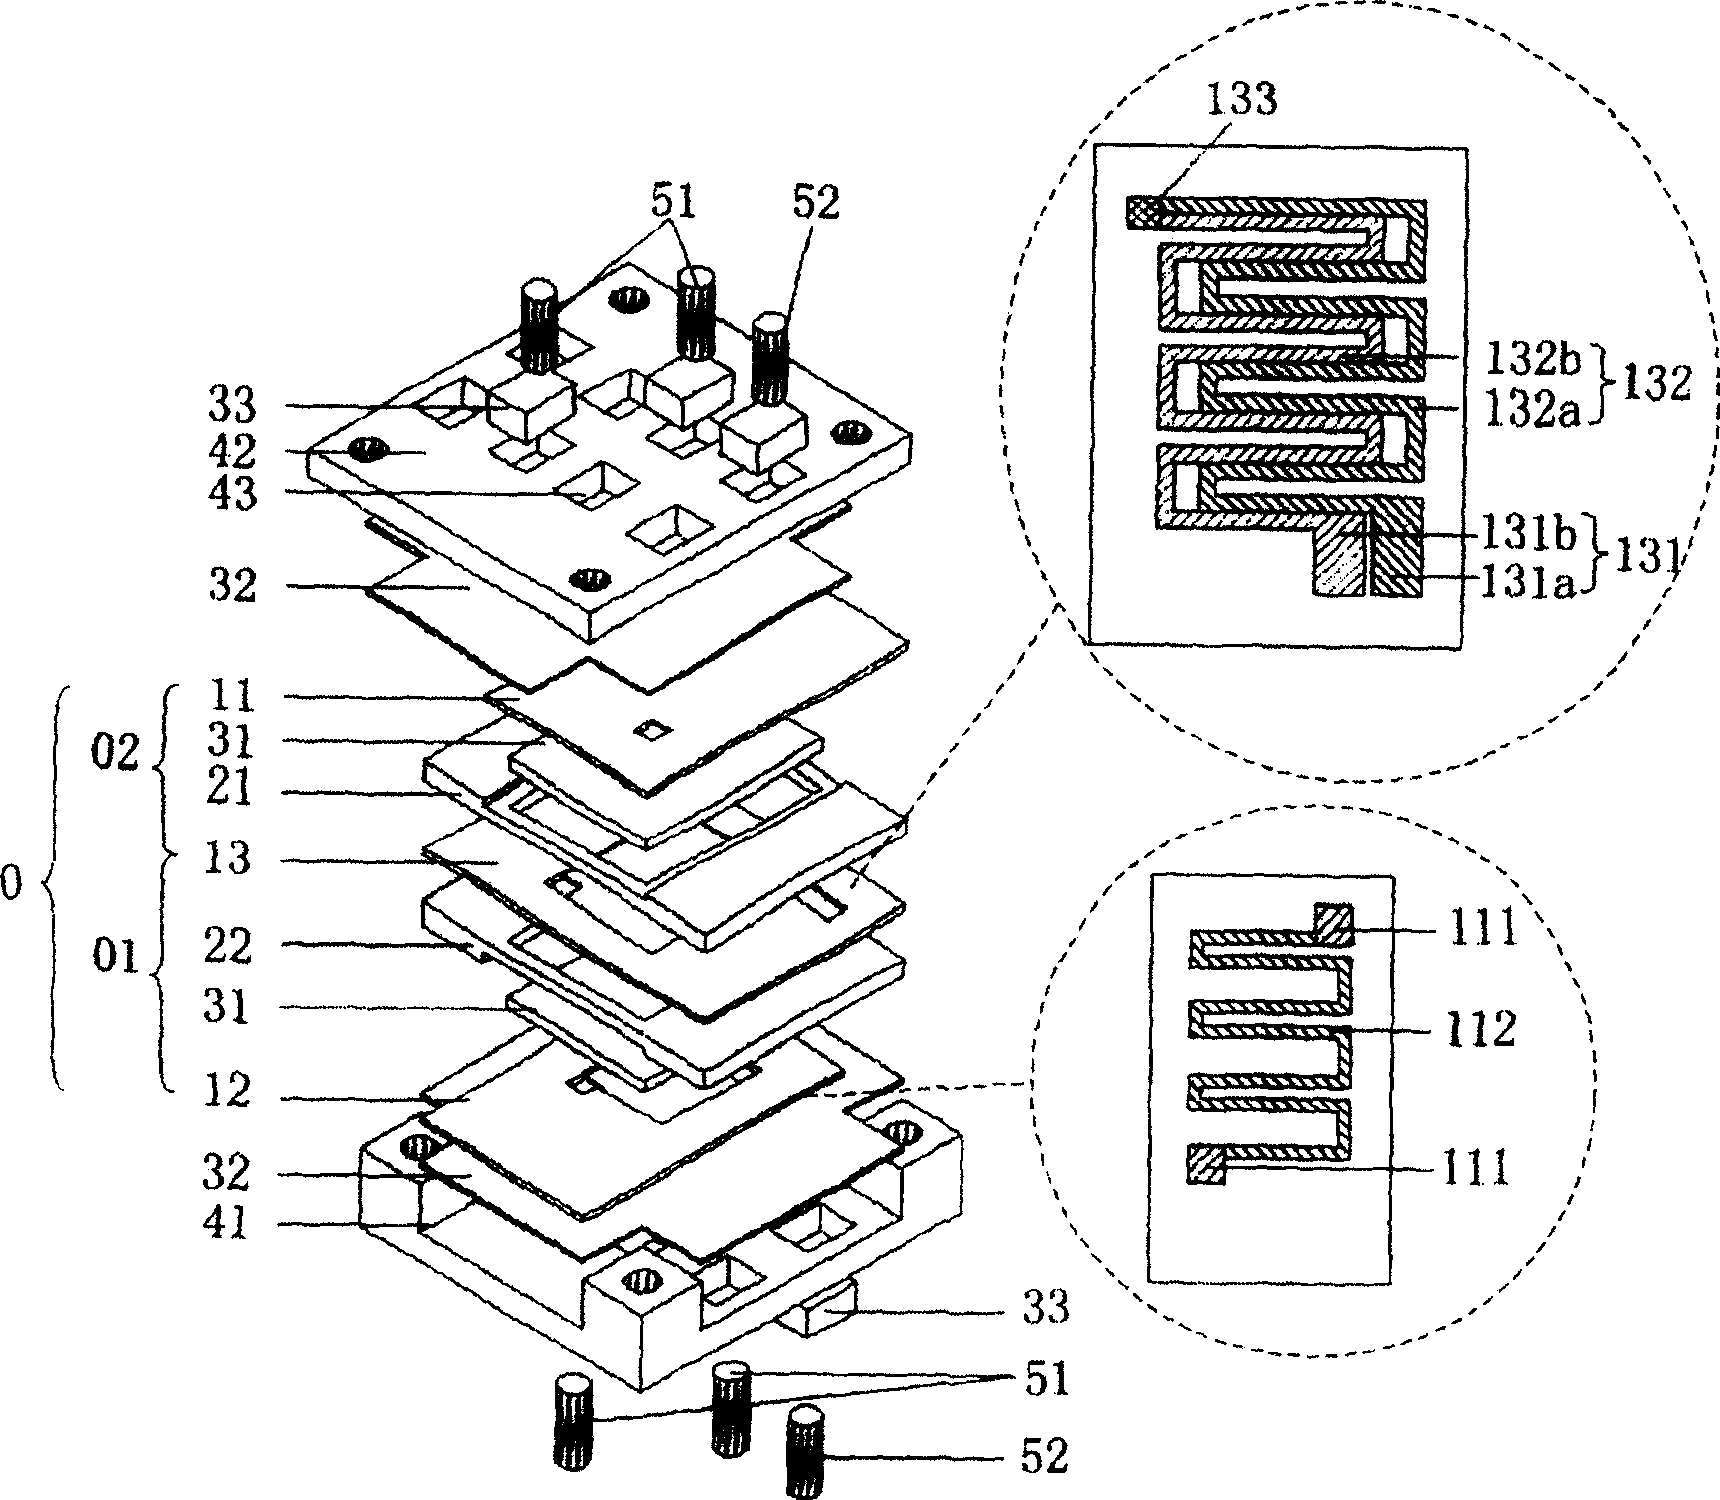 Stack silicon-base miniature fuel celles and manufacturing method